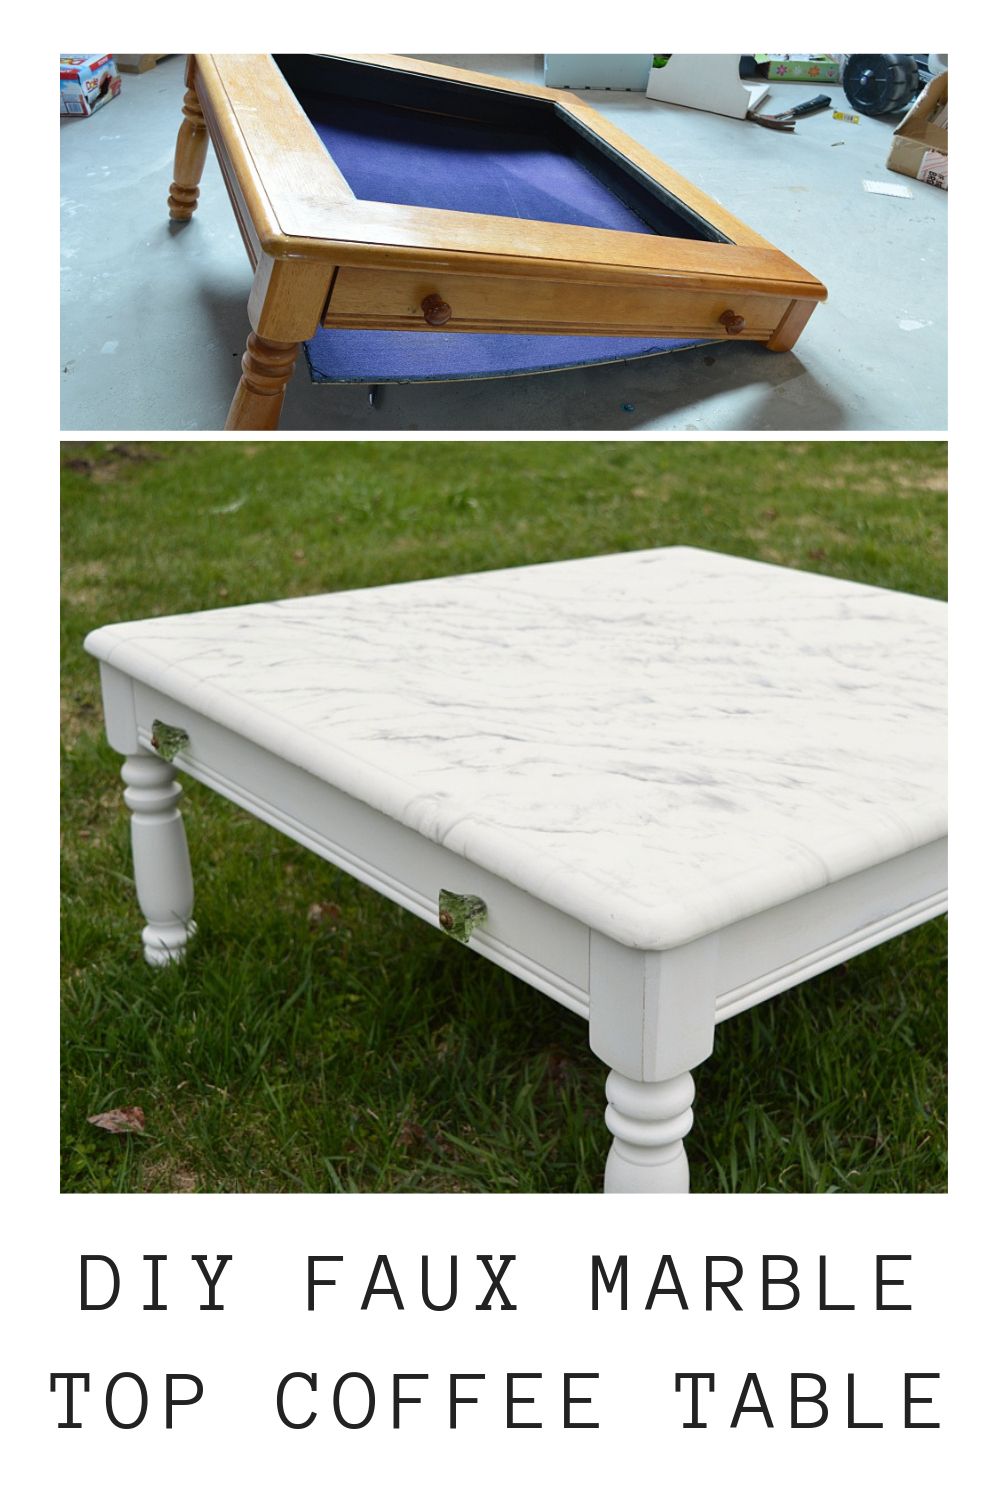 How To Make A Faux Marble Top Coffee Table – The Vanderveen House With Faux Marble Top Coffee Tables (View 12 of 20)